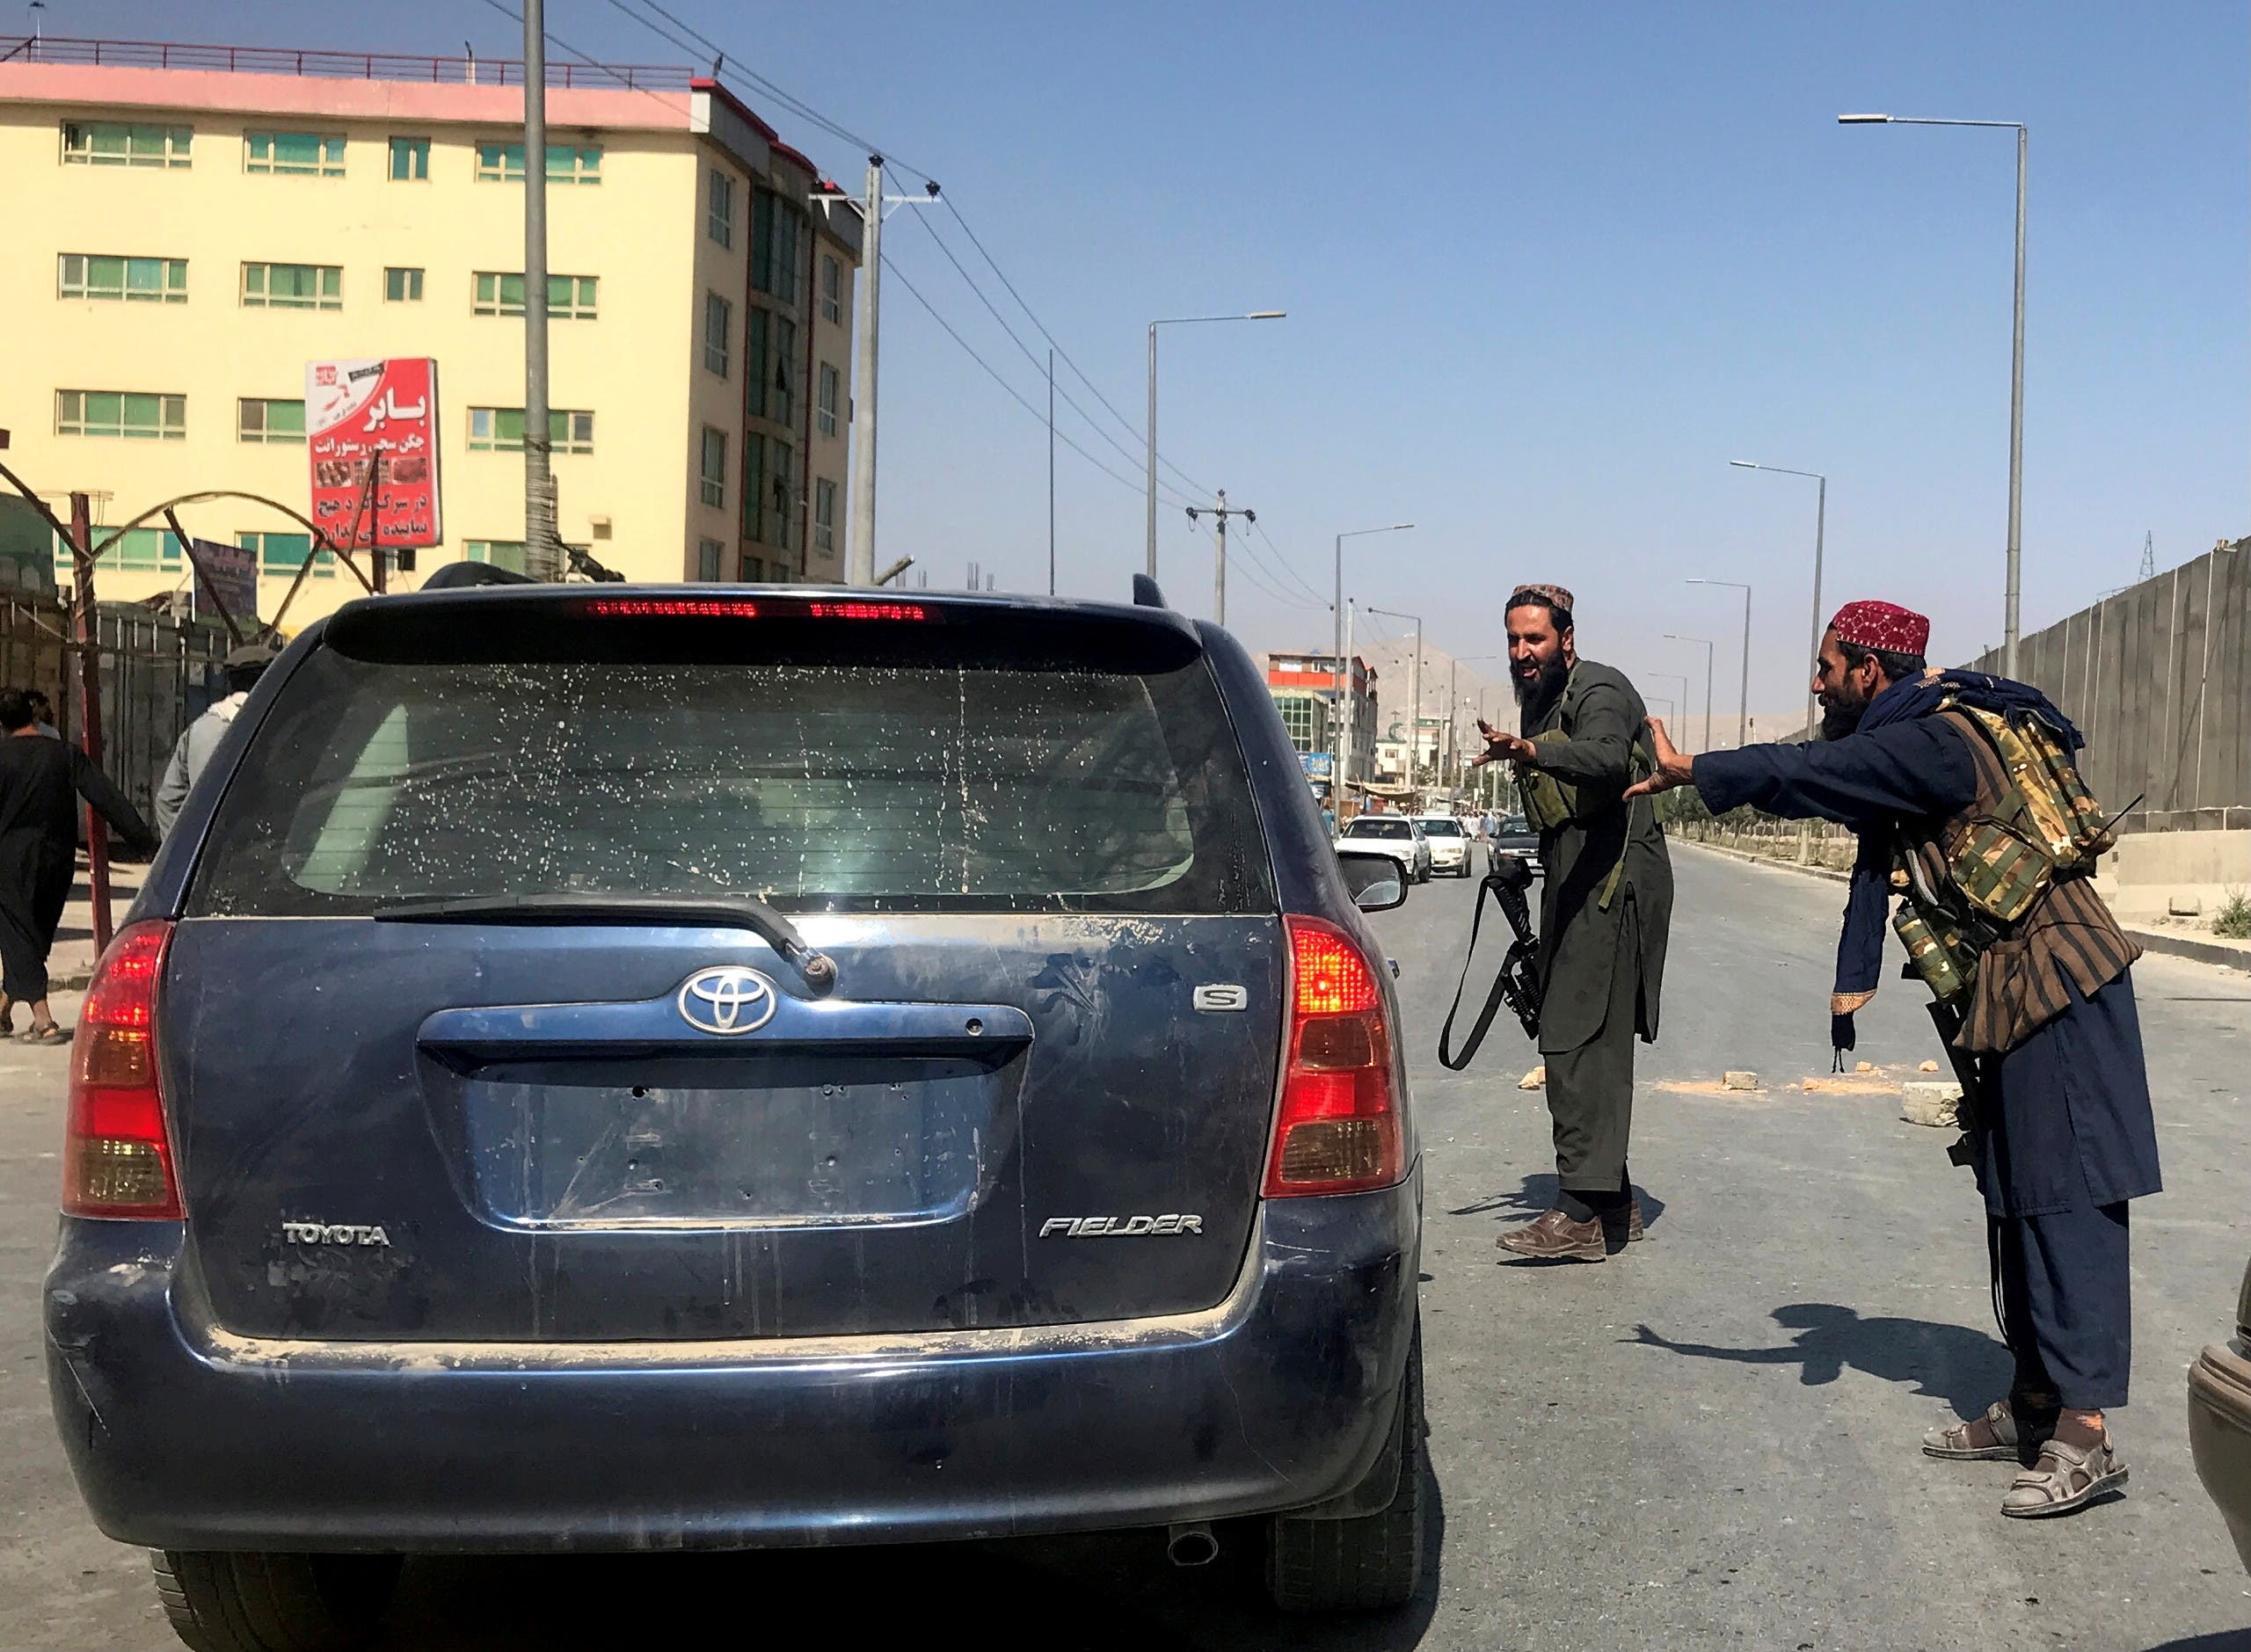 Members of Taliban forces gesture as they check a vehicle on a street in Kabul, Afghanistan, August 16, 2021. (File photo: Reuters)